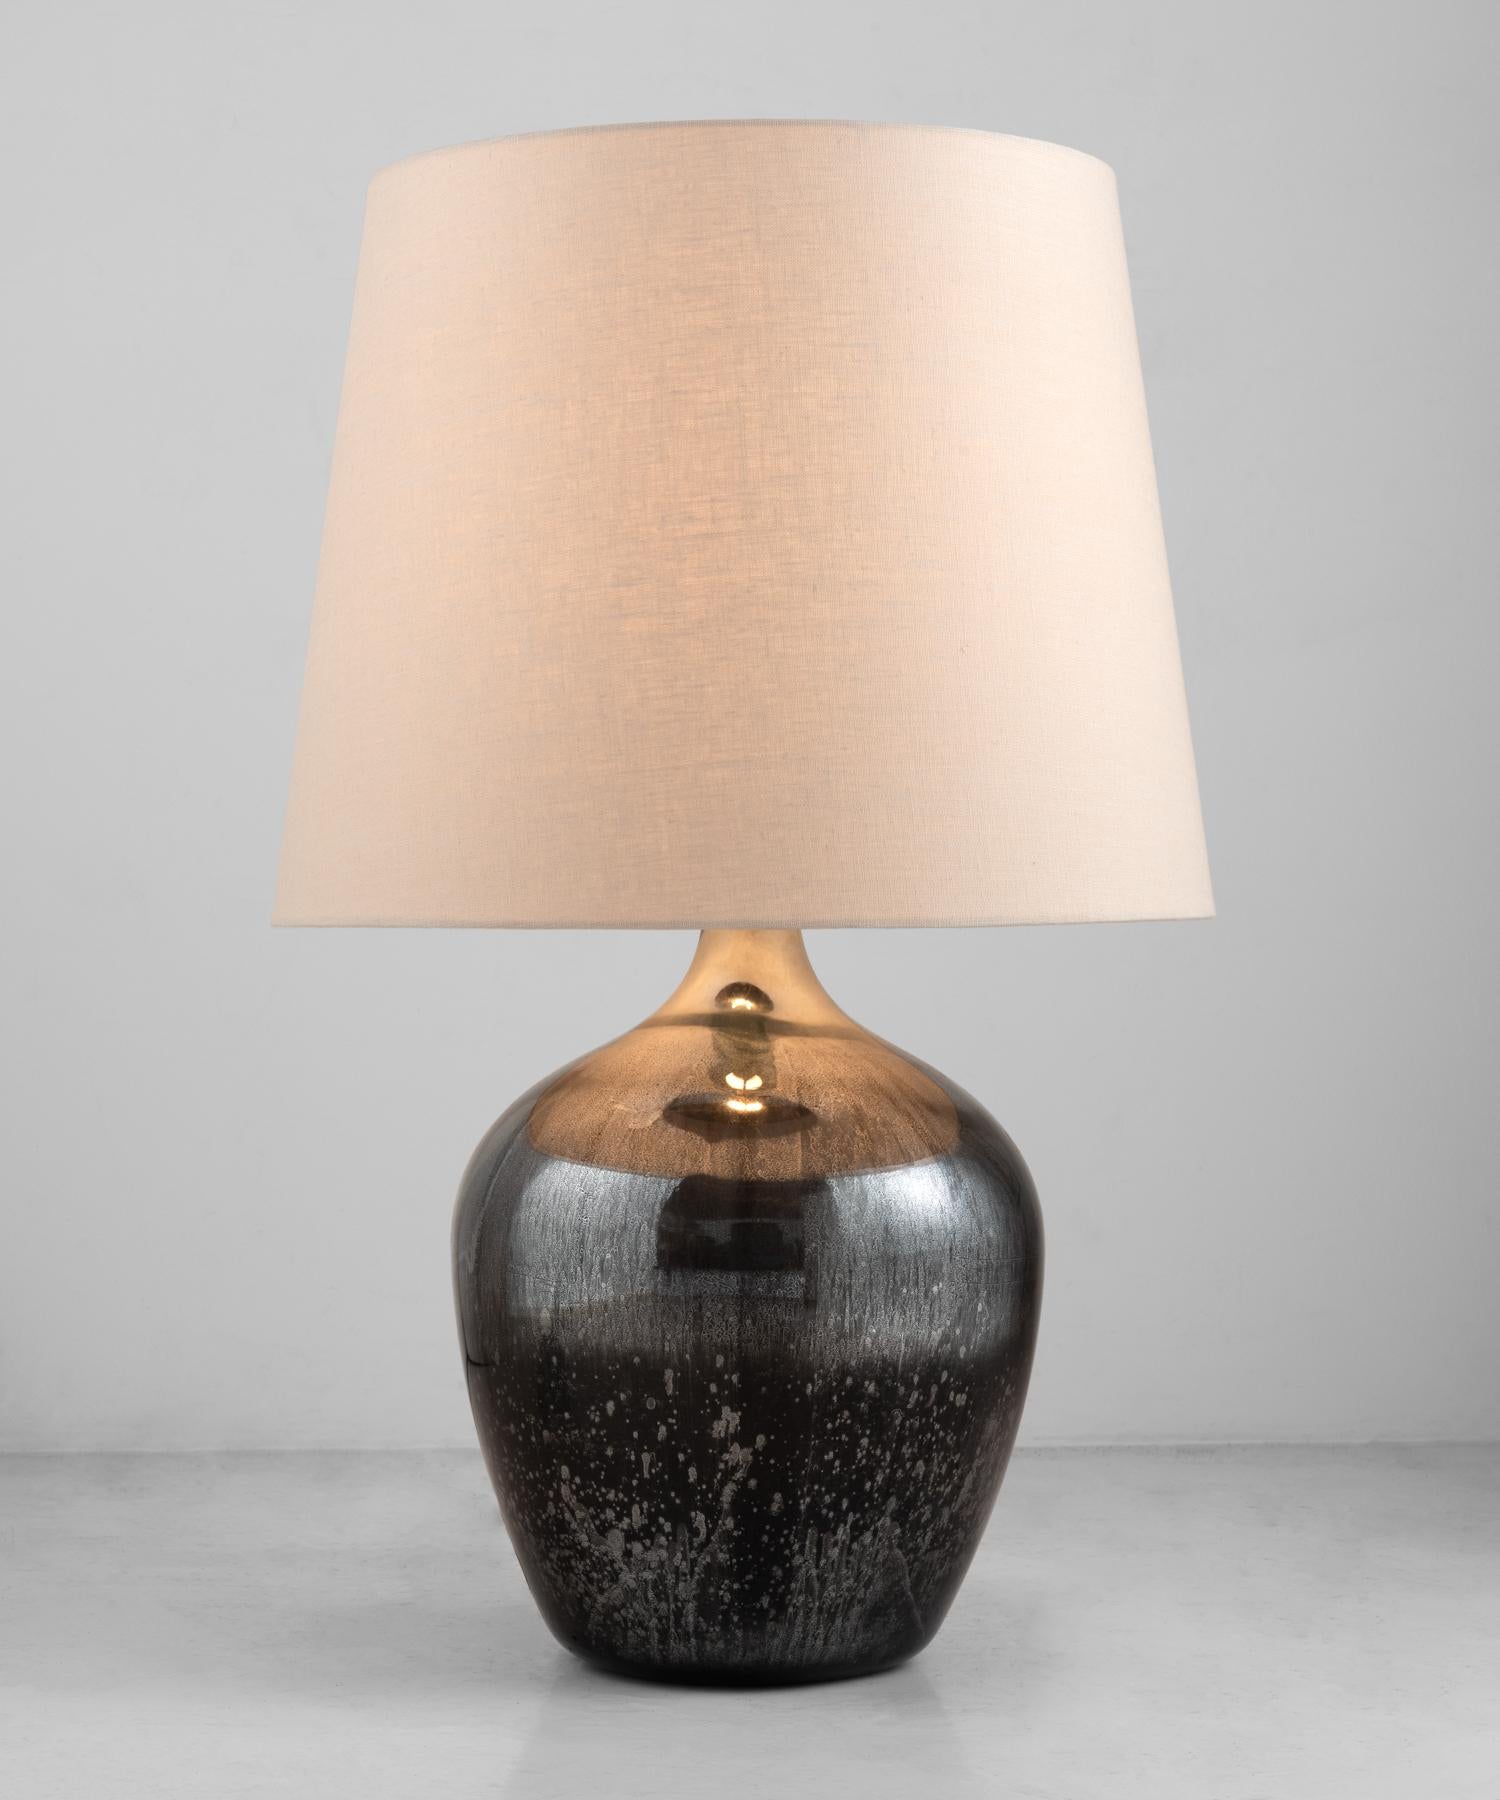 Modern Mottled Mirrored Table Lamps, England circa 1940